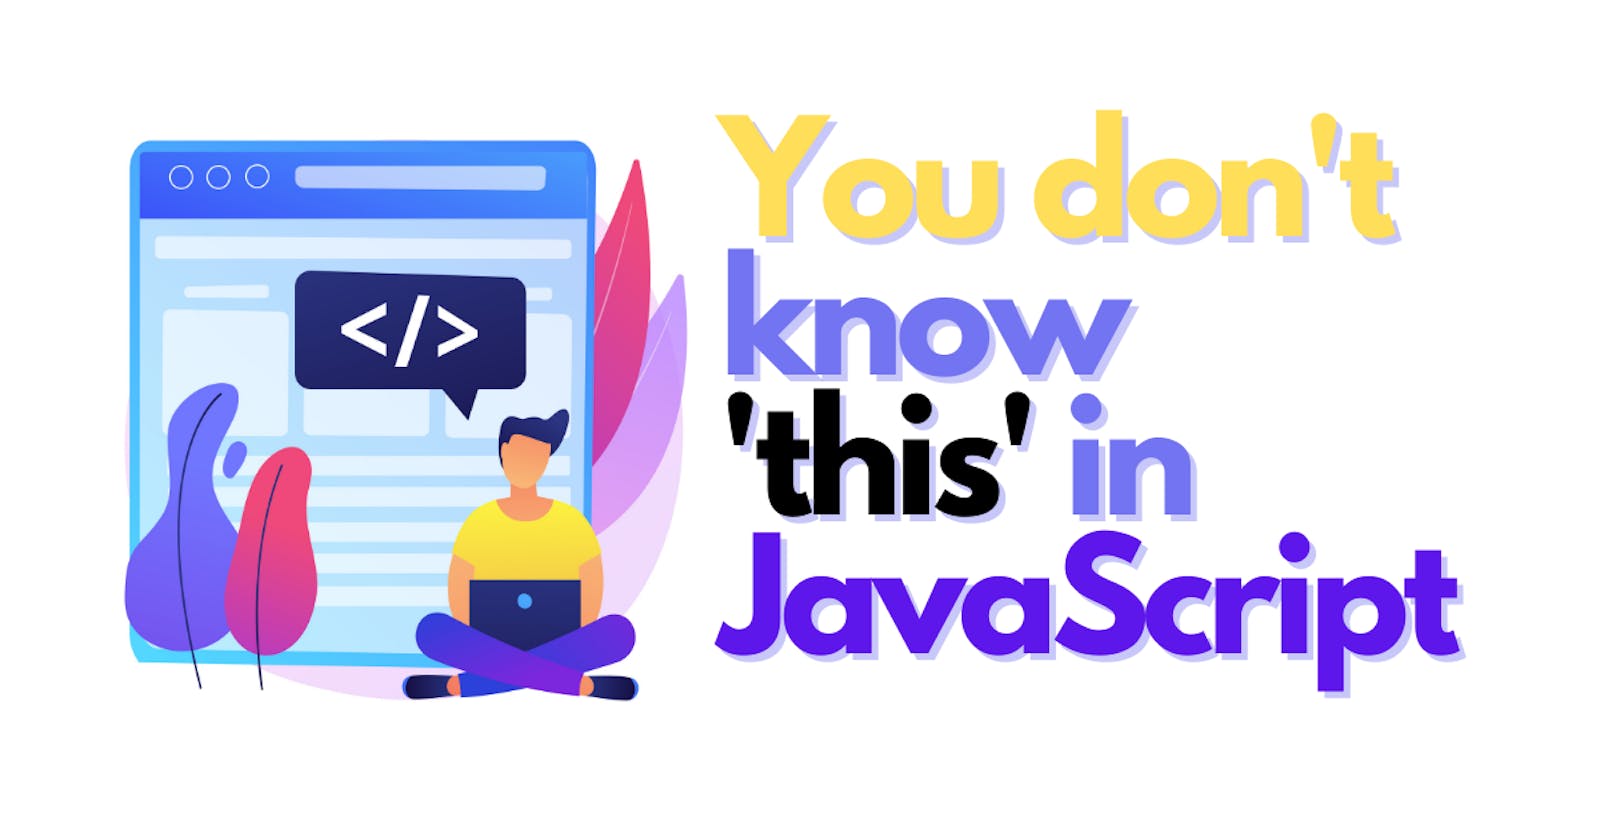 You don't know 'this' in JavaScript